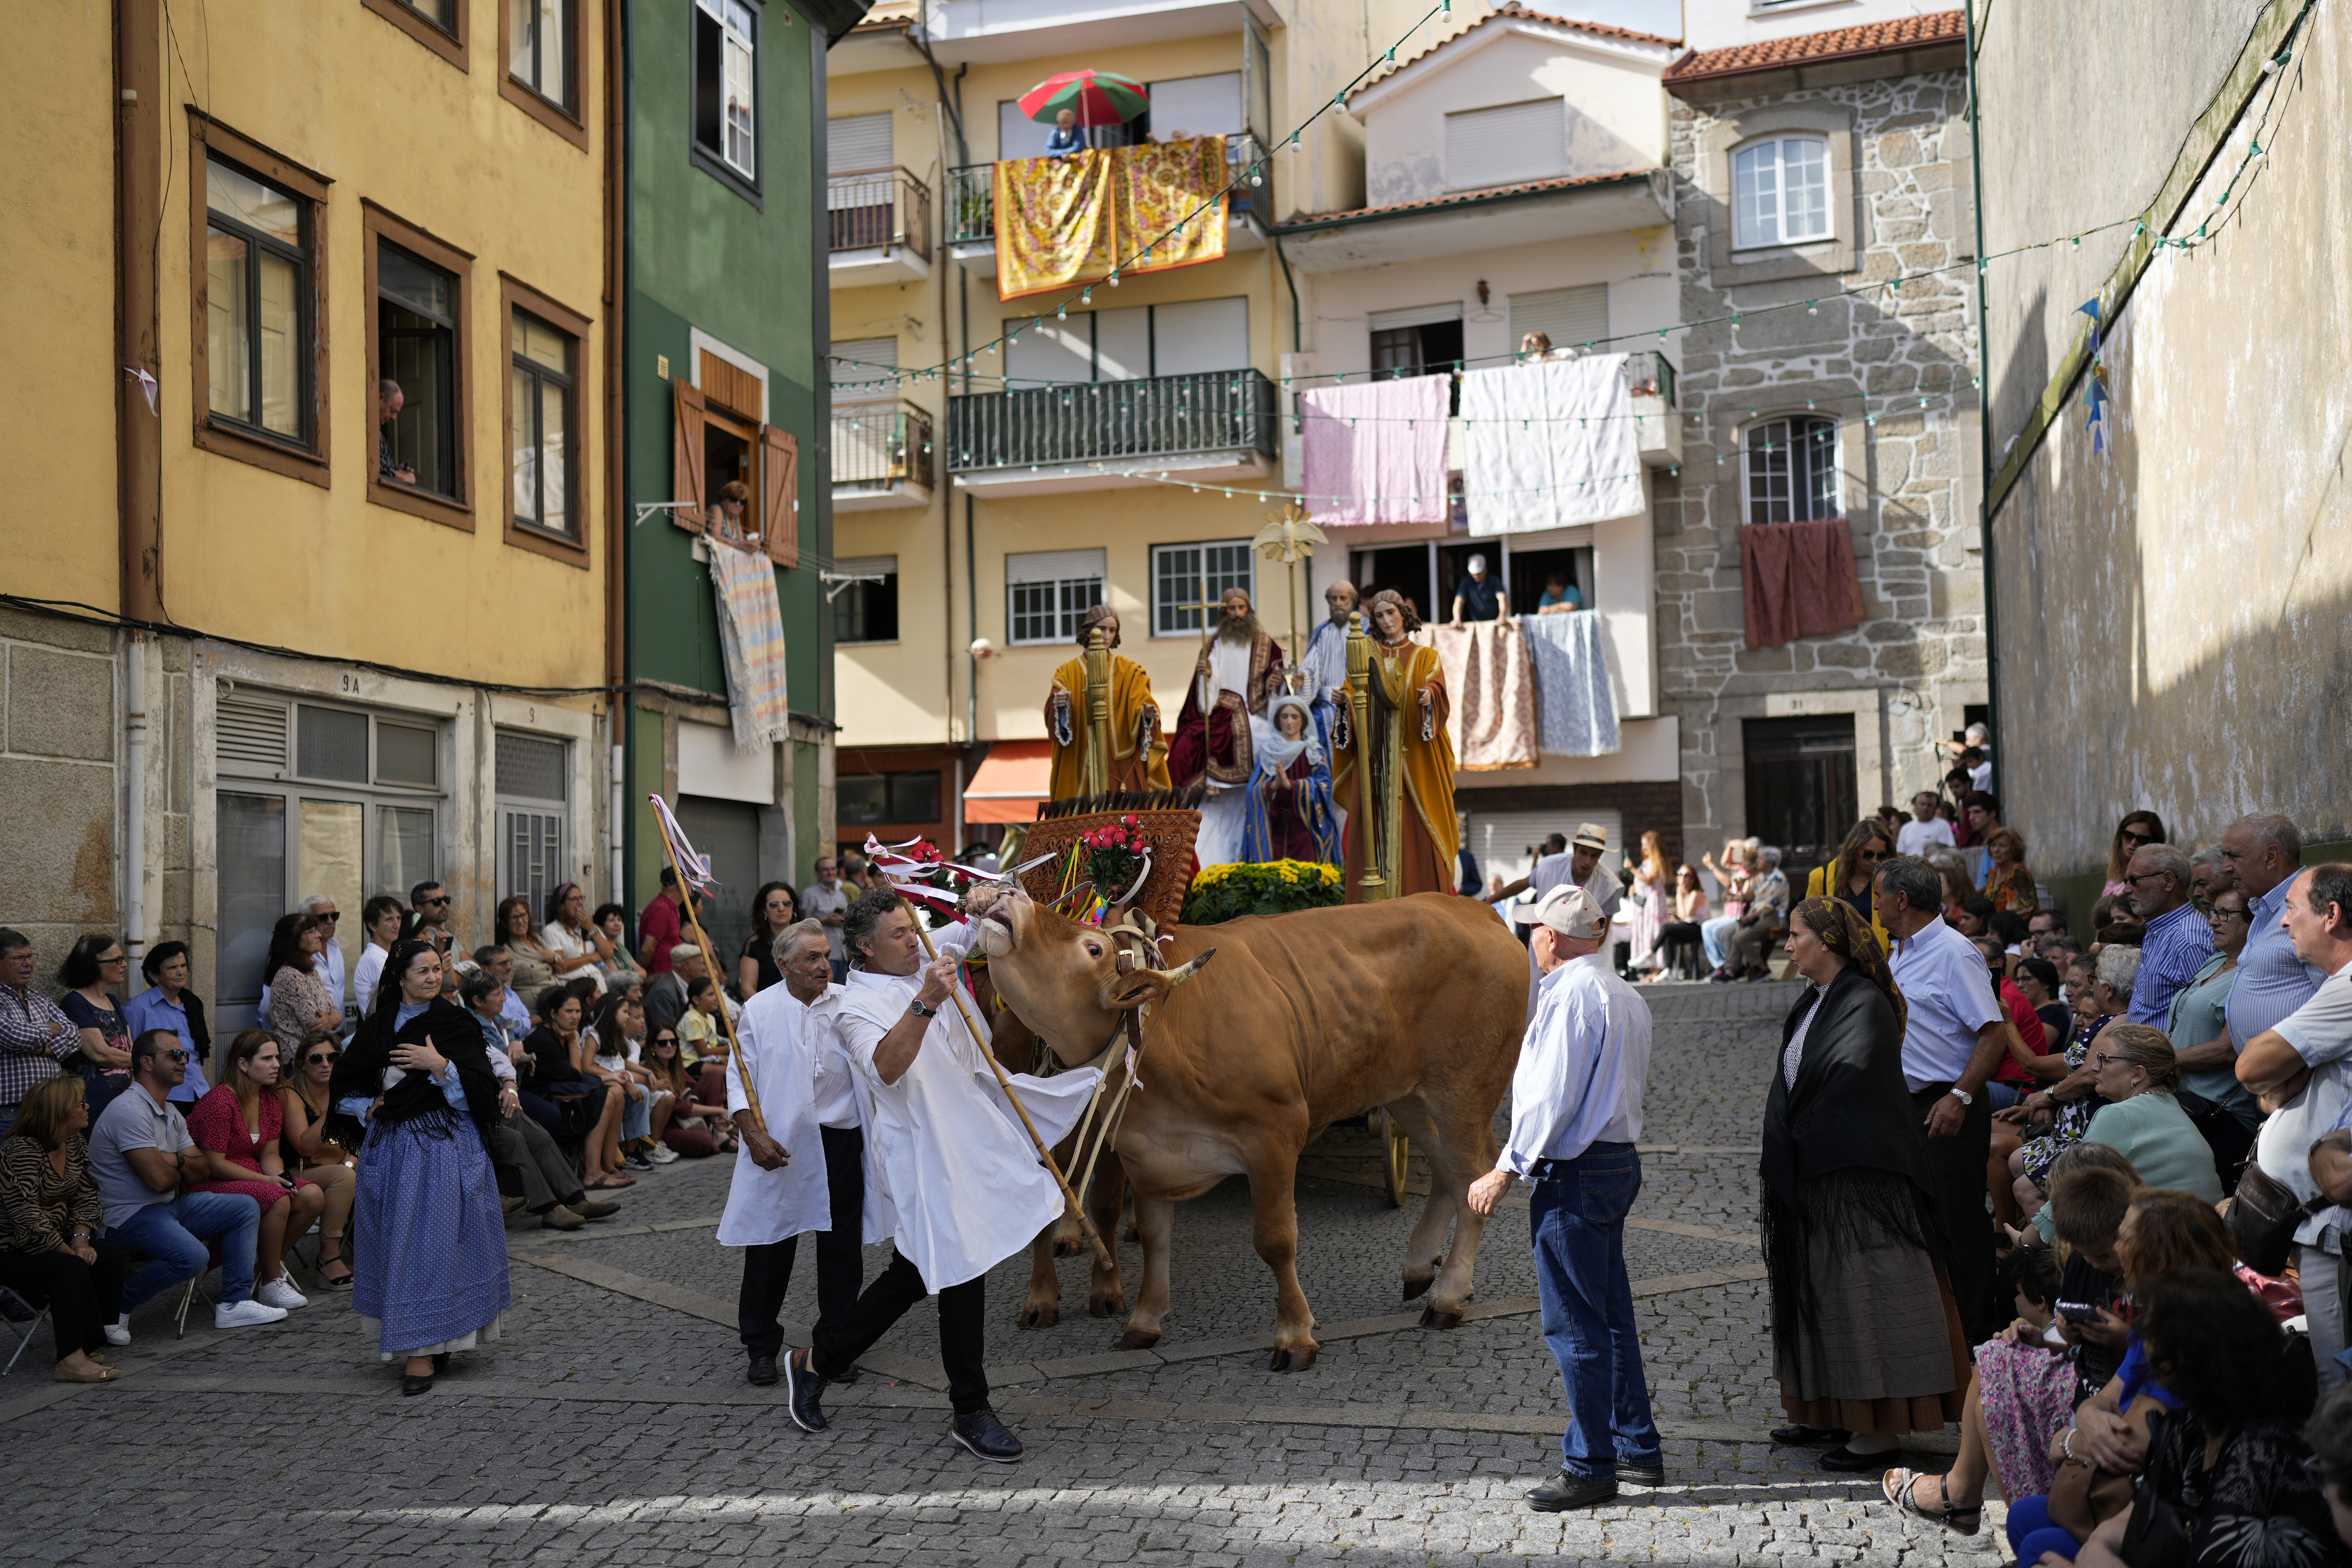 A handler struggles to control an ox pulling a float portraying the Assumption of the Virgin Mary, during the Our Lady of Remedies procession in the small town of Lamego, in the Douro River Valley, Portugal, Friday, Sept. 8, 2023. One of Portugal's largest and oldest religious festivals, the two-week celebrations that culminate with the procession, draw thousands. (AP Photo/Armando Franca)